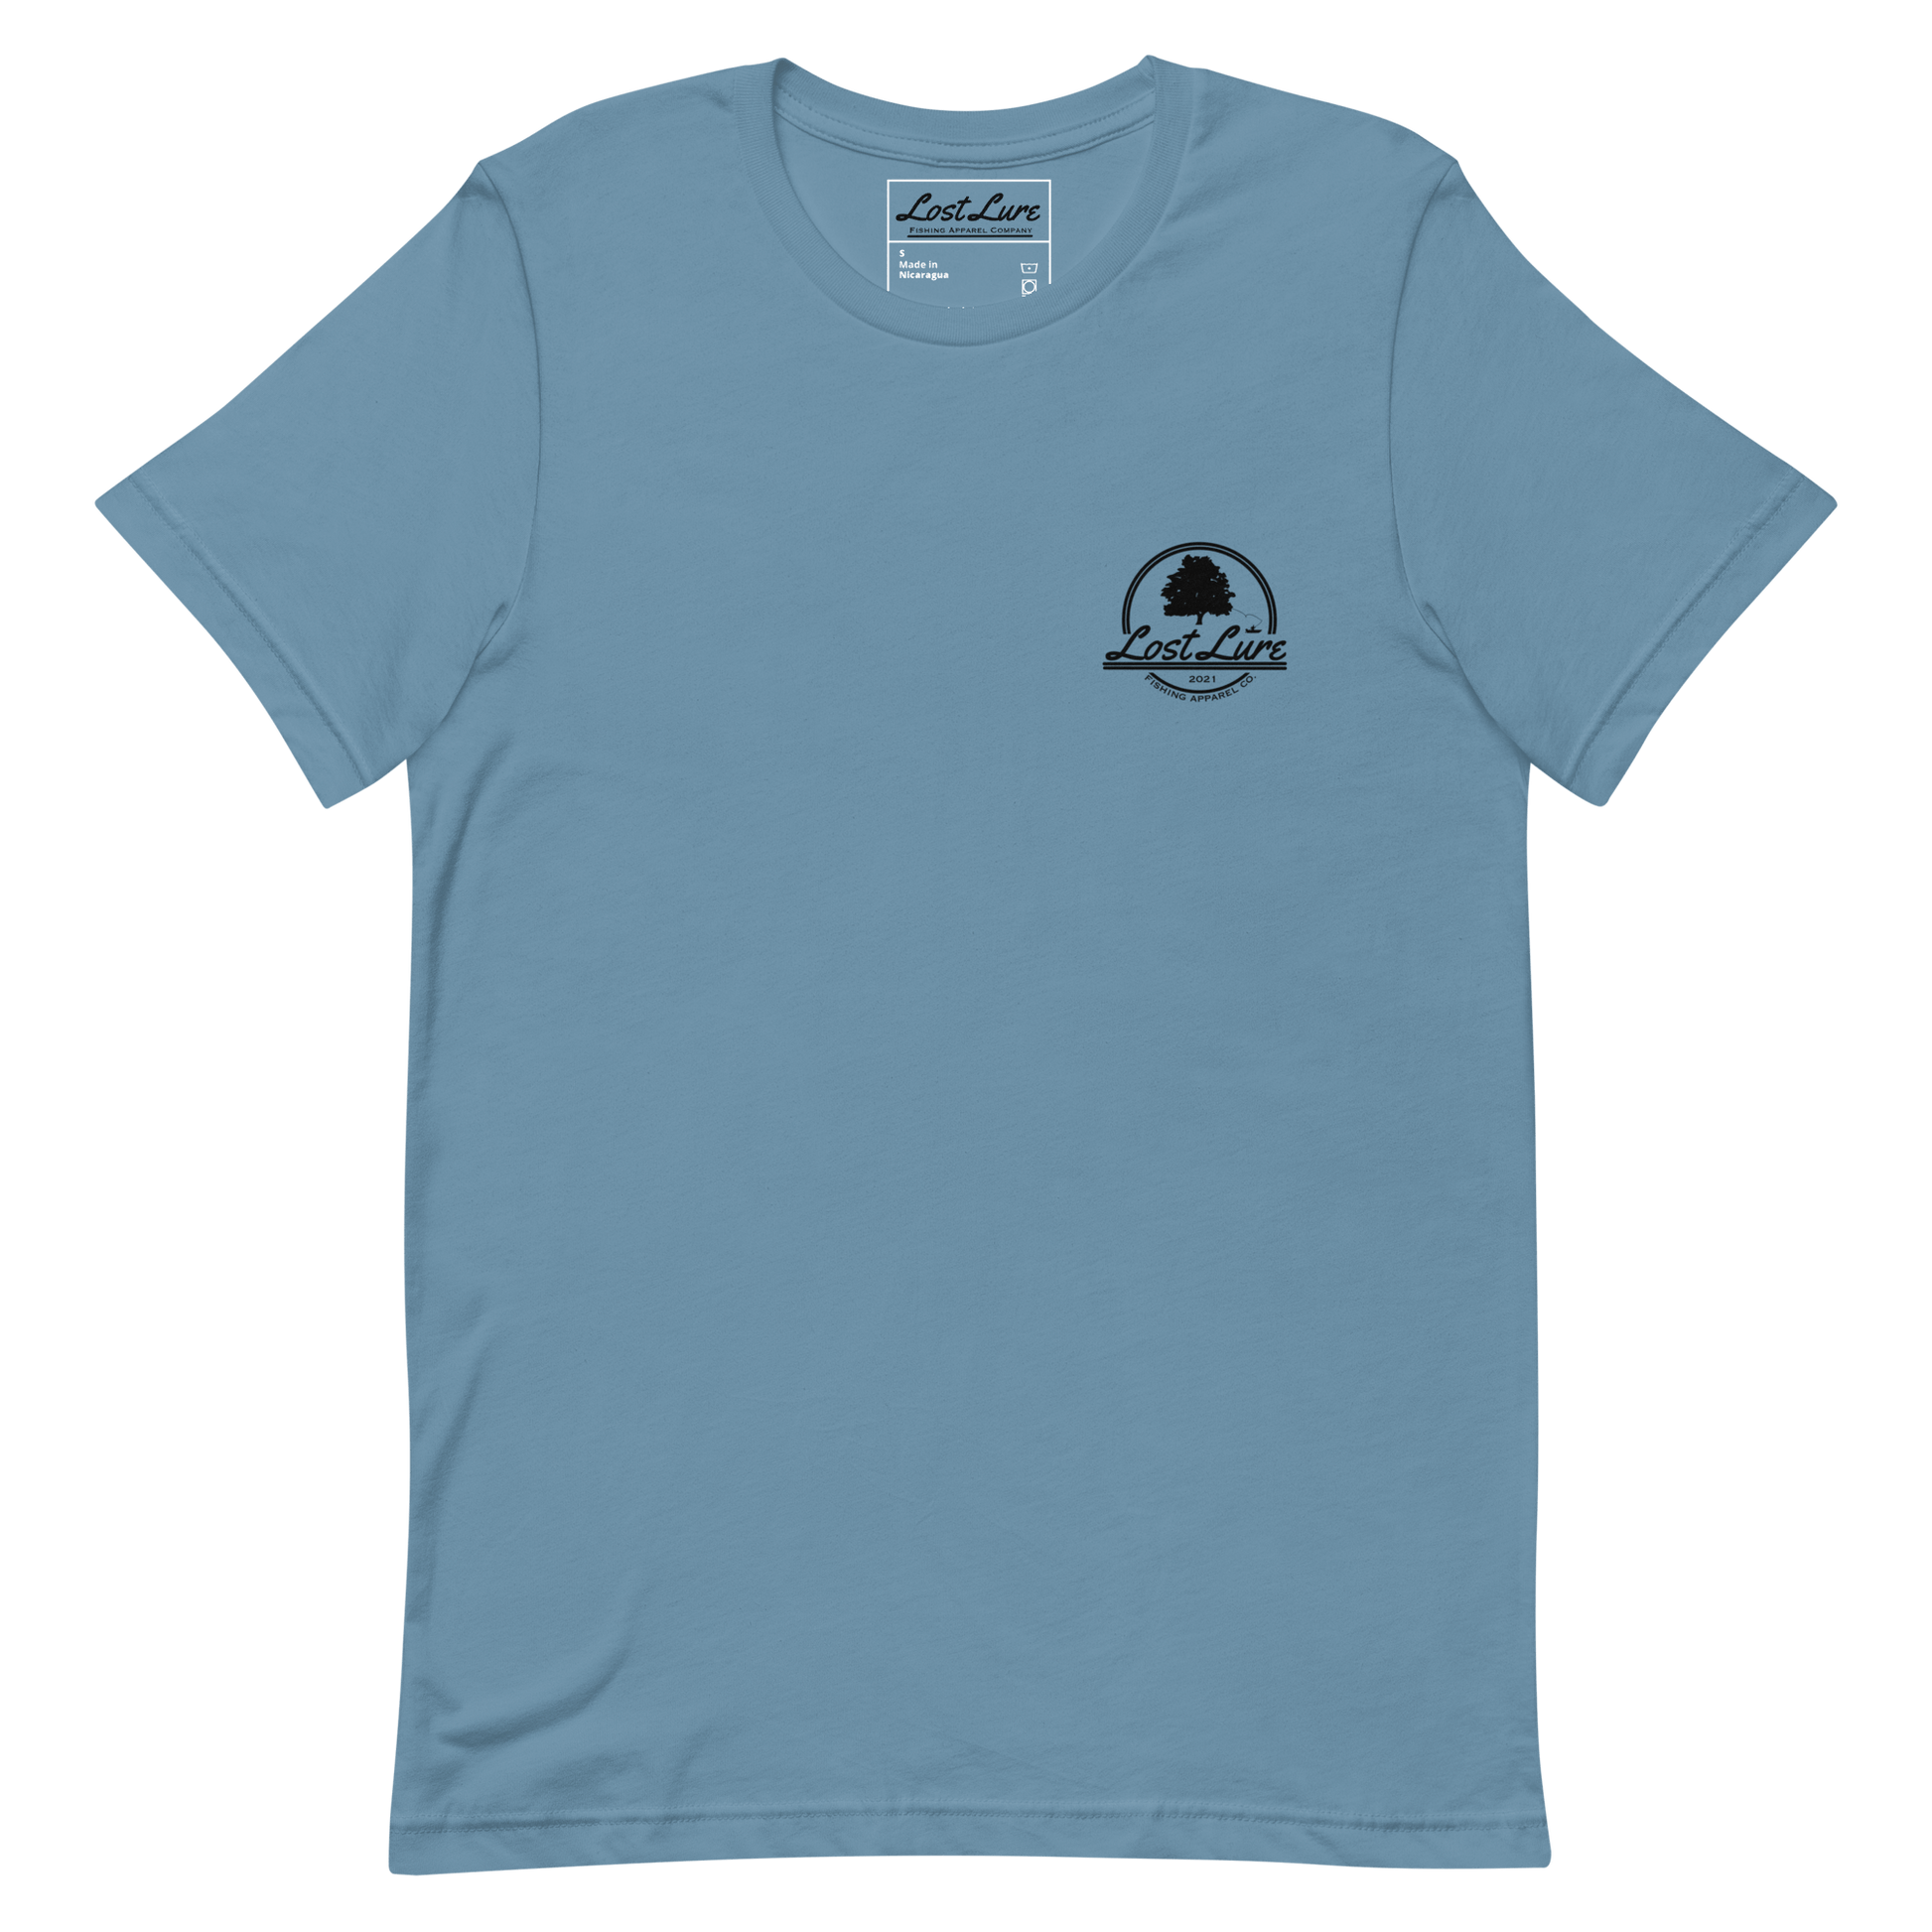 Bass fishing shirt. It has a drawing of a fat bass and it reads “lost lure co, catch fat fish”. The bass design is on the back, the lost lure logo is on the front. Steel blue shirt, front side 